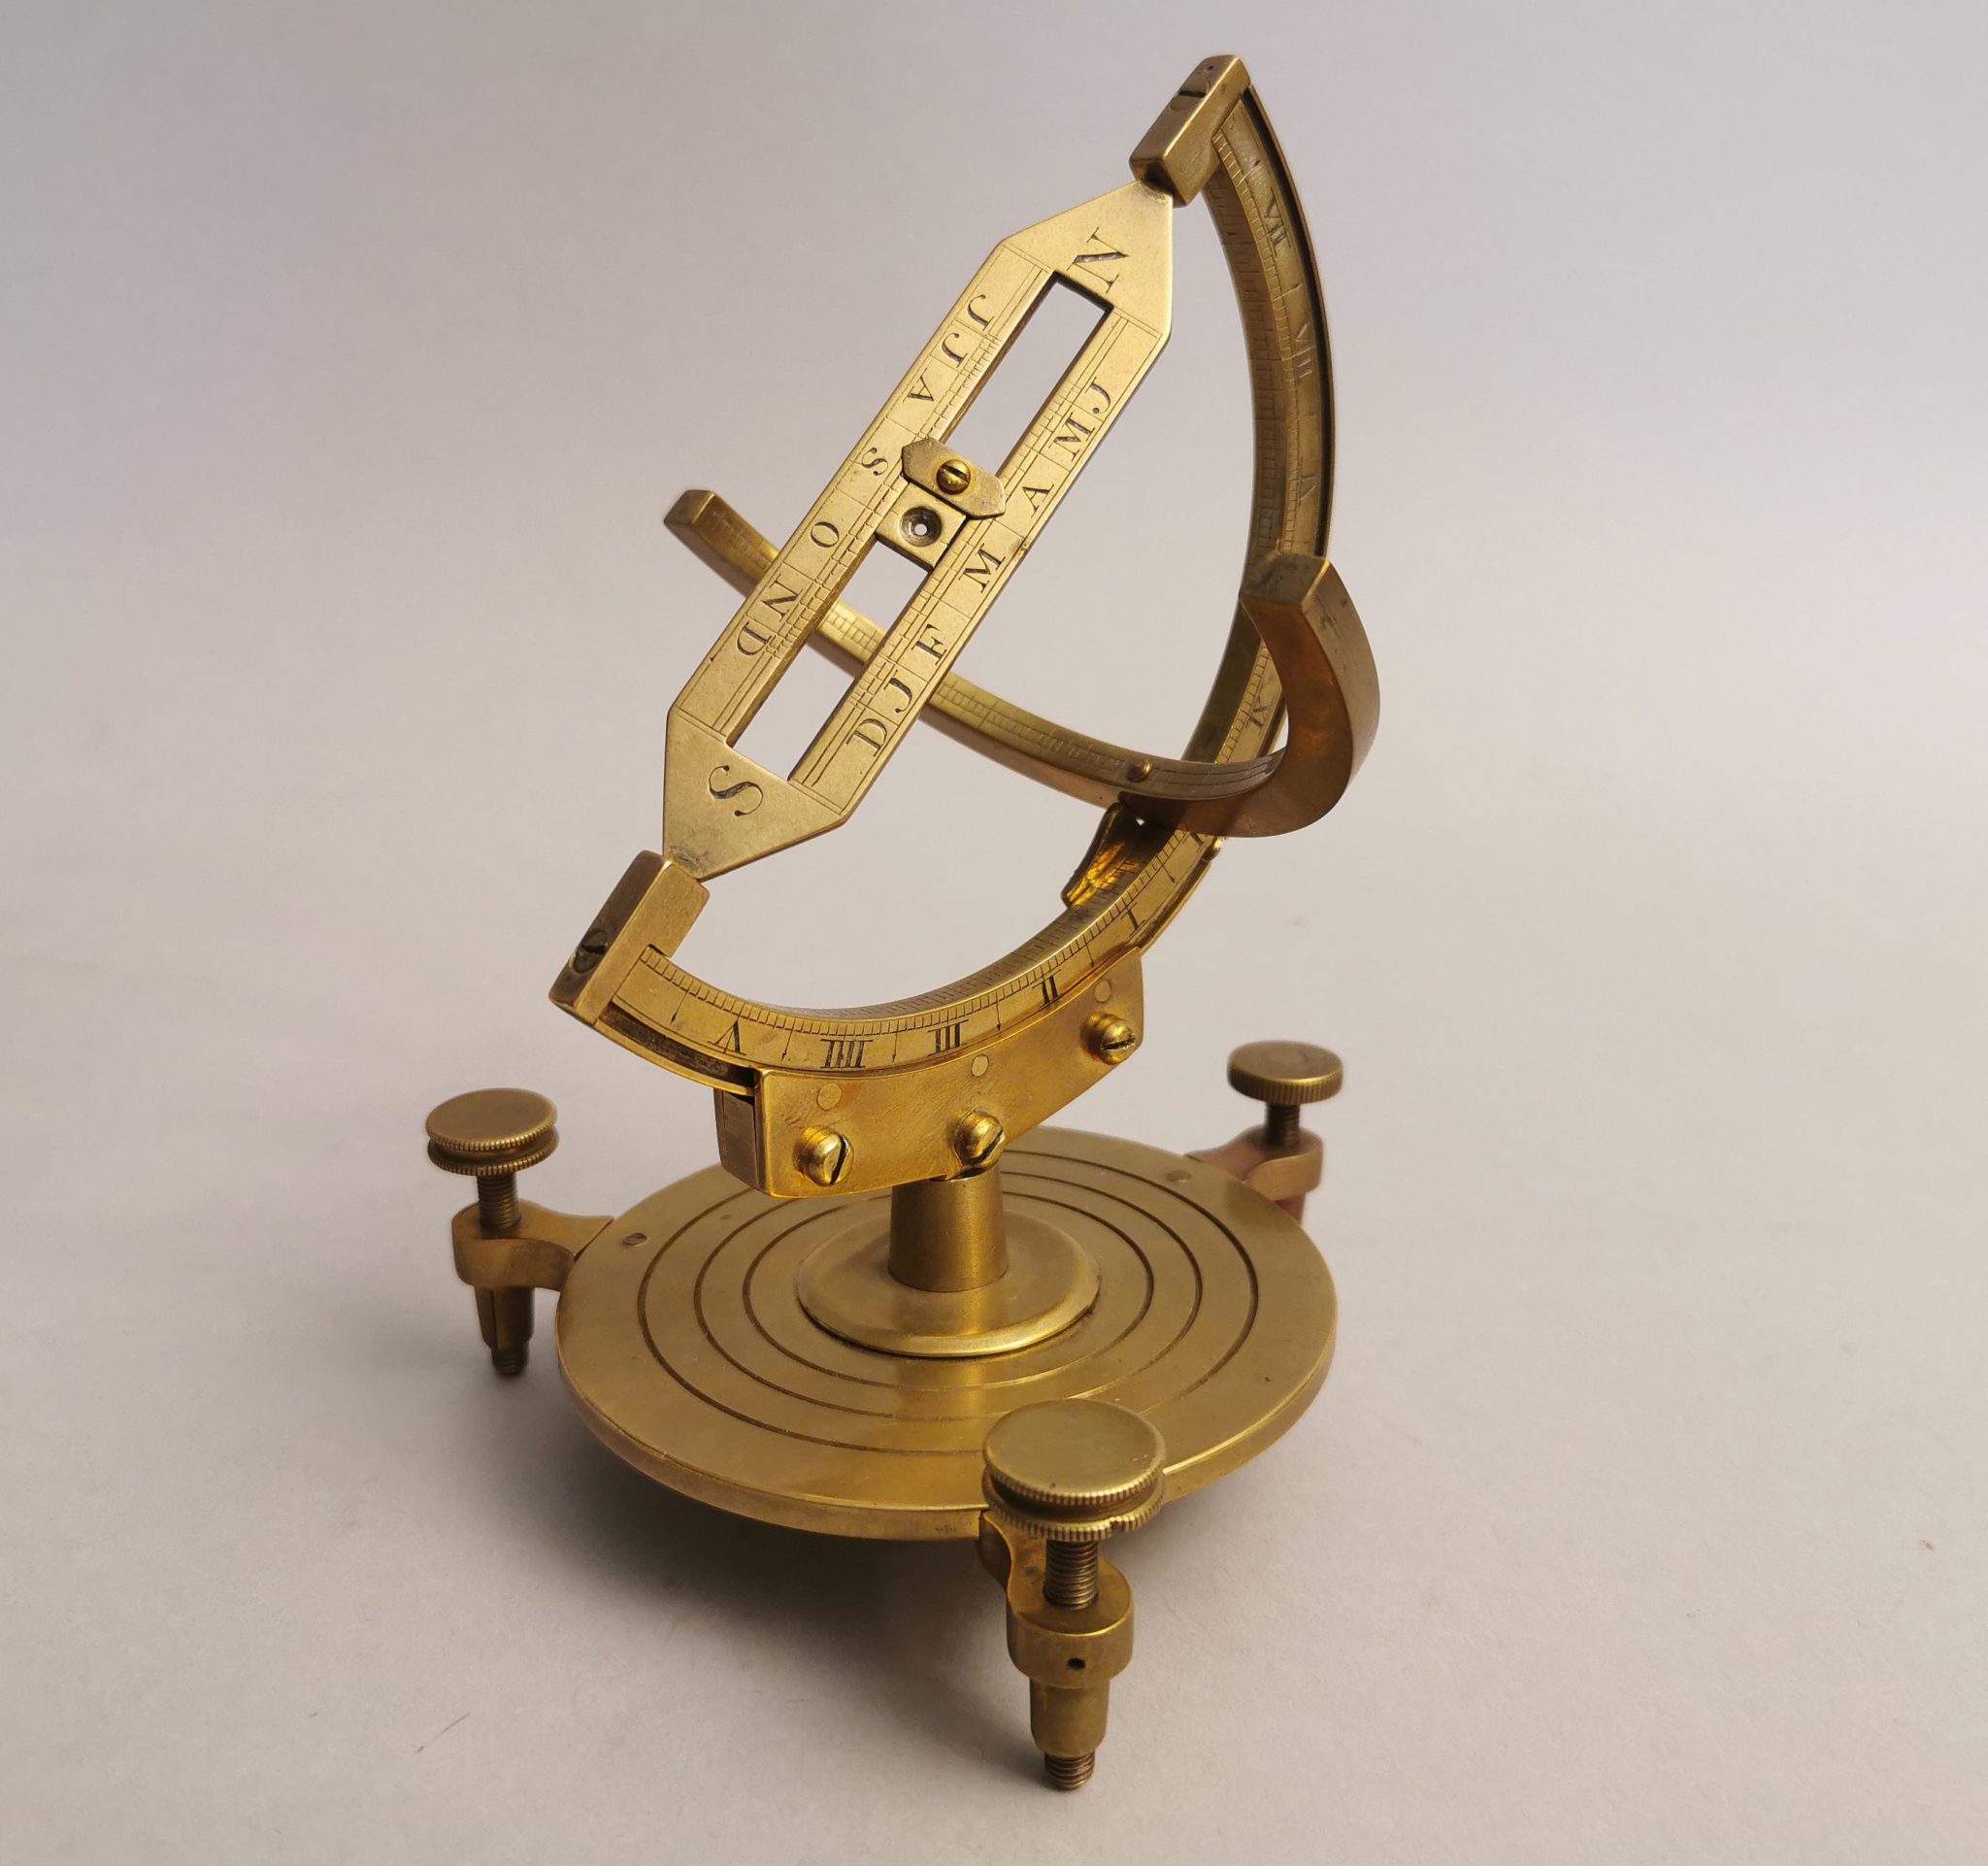 Rare first half of 19th century English Equinoctial dial